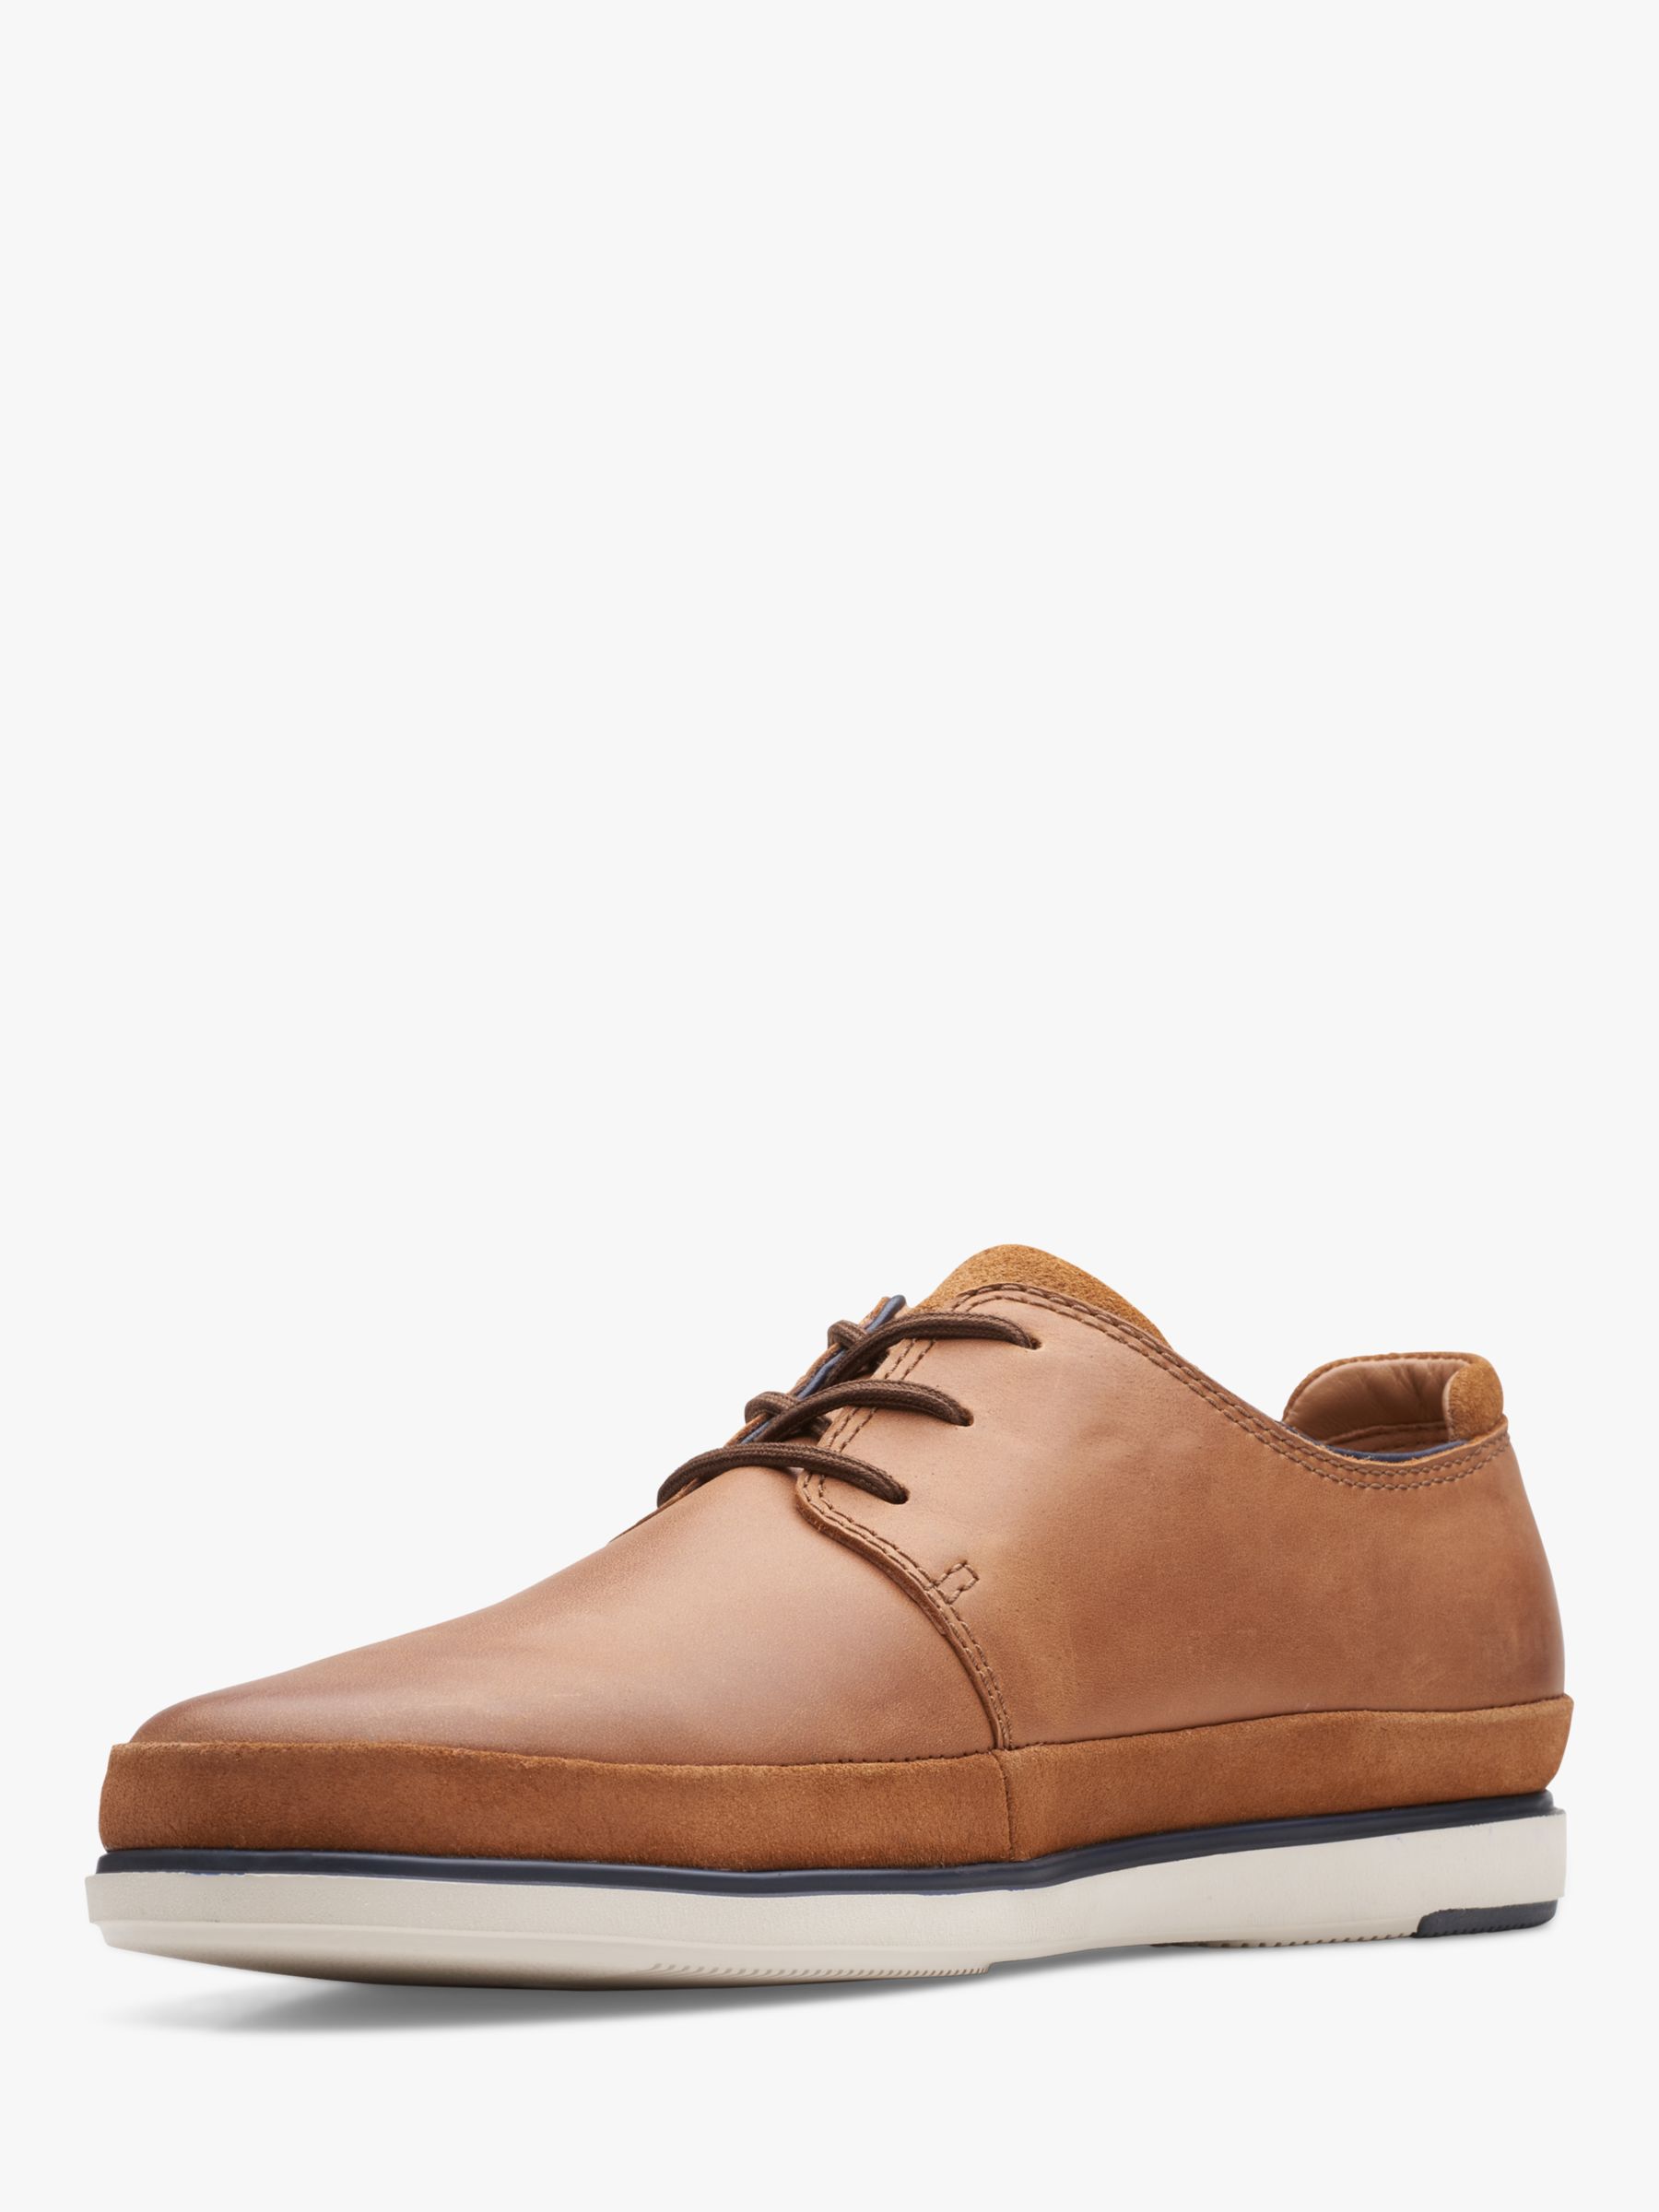 Clarks Bratton Lace Up Casual Leather Shoes, Dark Tan at John Lewis ...